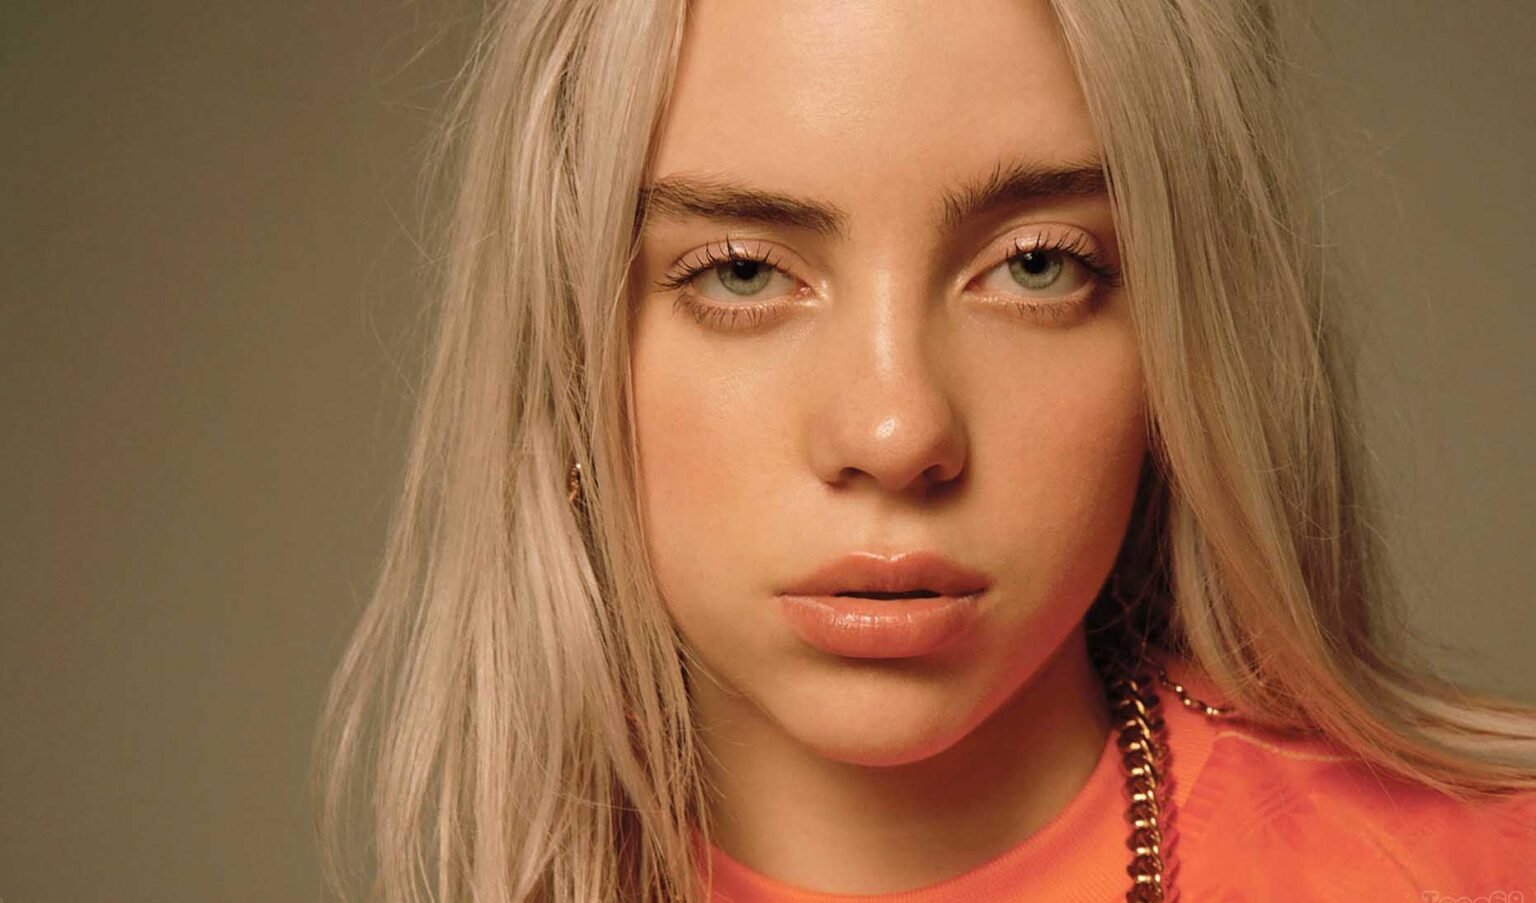 Billie Eilish has swapped out her iconic black & green hair for a bright blonde do. Does this change signal an "end of an era" for songs to come?